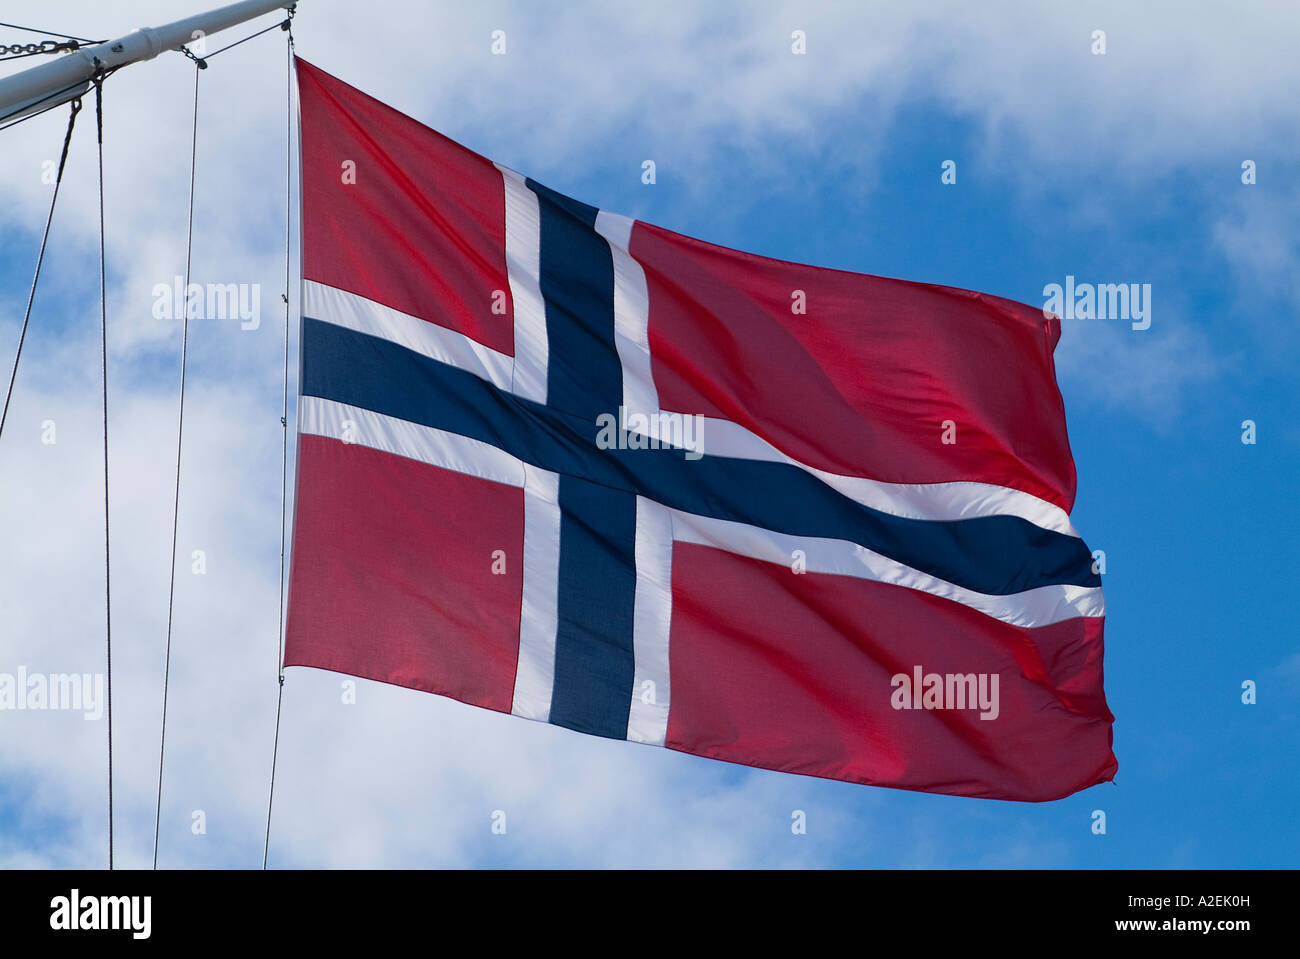 dh Norwegian flag FLAG NORWAY Red background with white and blue cross ensign on board sailing ship fly nation colours ships flags Stock Photo